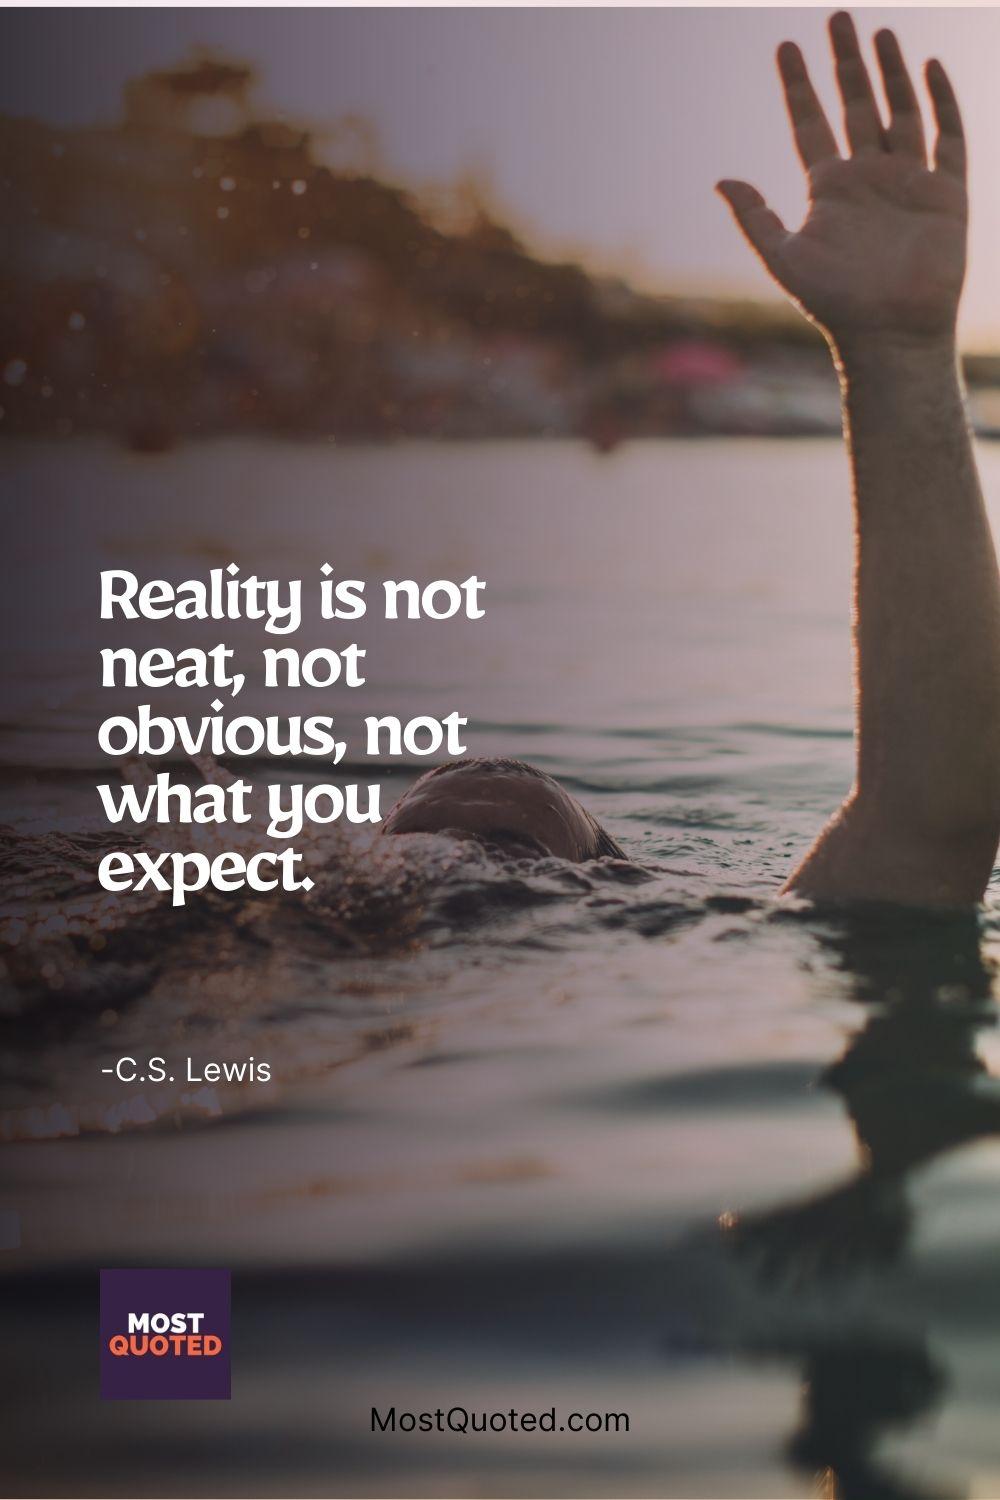 Reality is not neat, not obvious, not what you expect. - C.S. Lewis